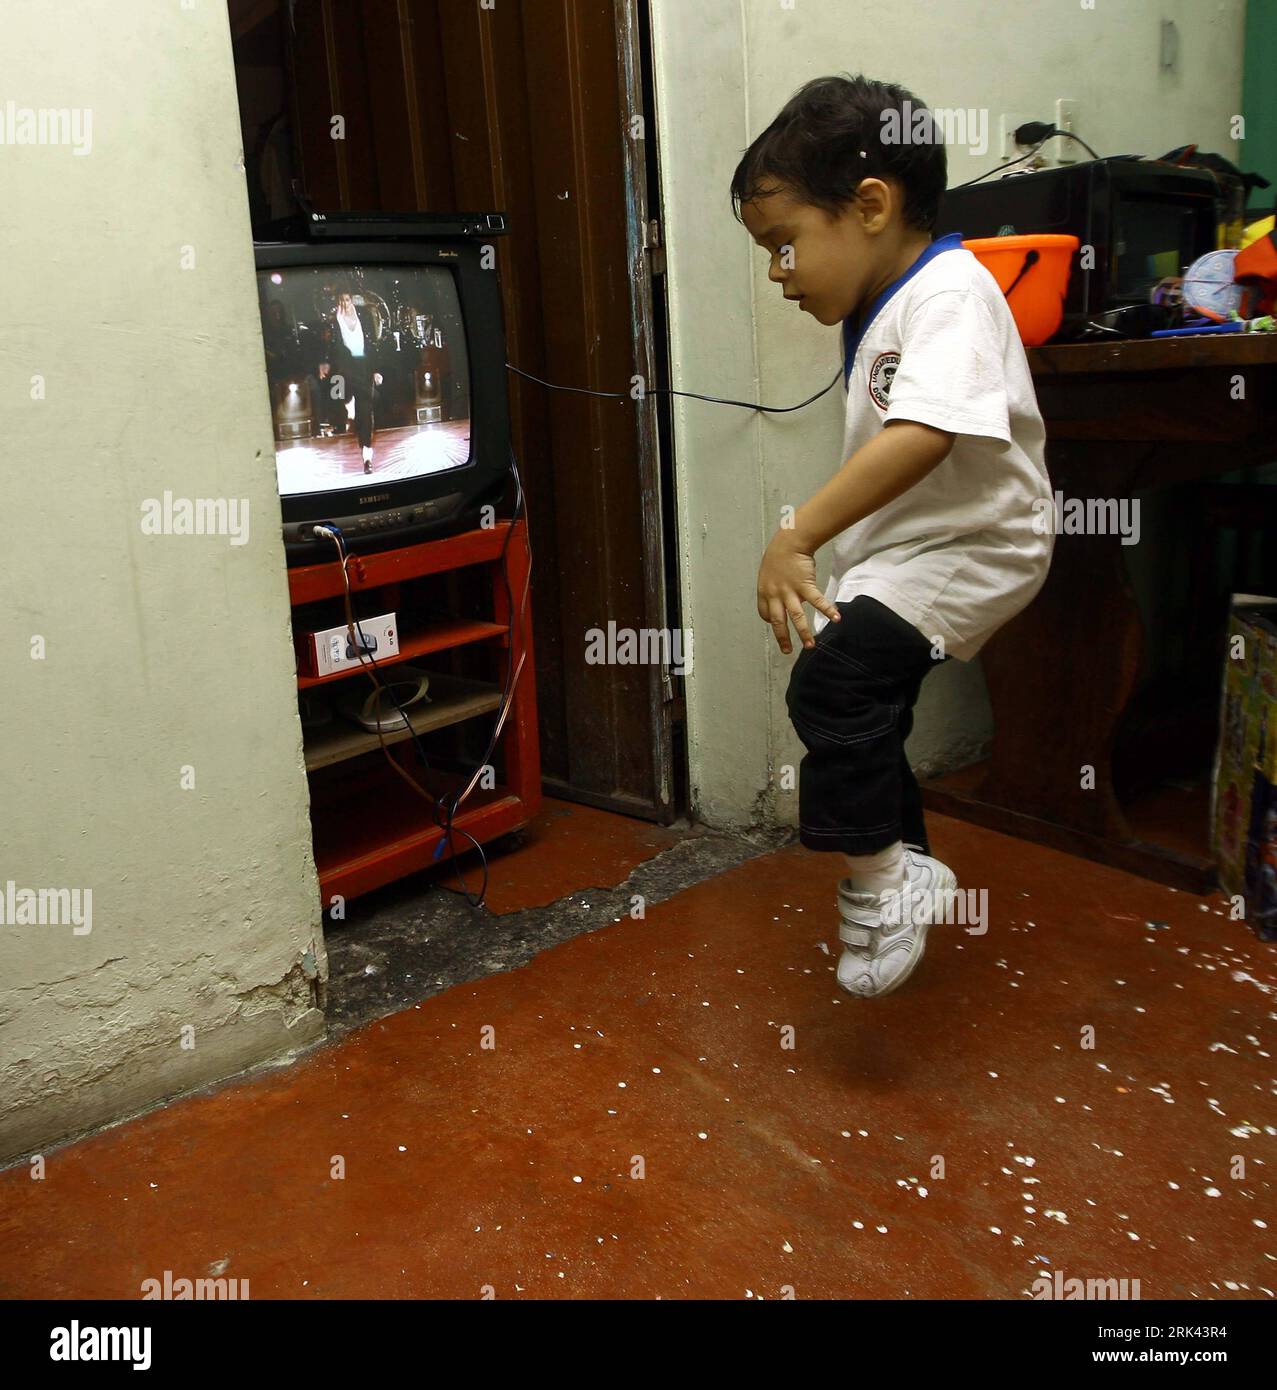 Bildnummer: 53584916  Datum: 30.10.2009  Copyright: imago/Xinhua (091107) -- BARQUISIMETO, Nov. 7, 2009 (Xinhua) -- Jose Manuel Sanchez Aguero, a five-year-old boy , imitates Michael Jackson s dancing at home in Barquisimeto, Venezuela, Oct. 30, 2009. Jose s father Miguel Angel Sanchezis a technician and a part-time host for Children s parties, which sets a good example to his son. Although quiet and shy in class, Jose now has learnt to perfom magic and dancing on children s parties. Michael Jackson is Jose s favourite idol and he is quite up on imitating the pop star. I ll be as famous as Mic Stock Photo